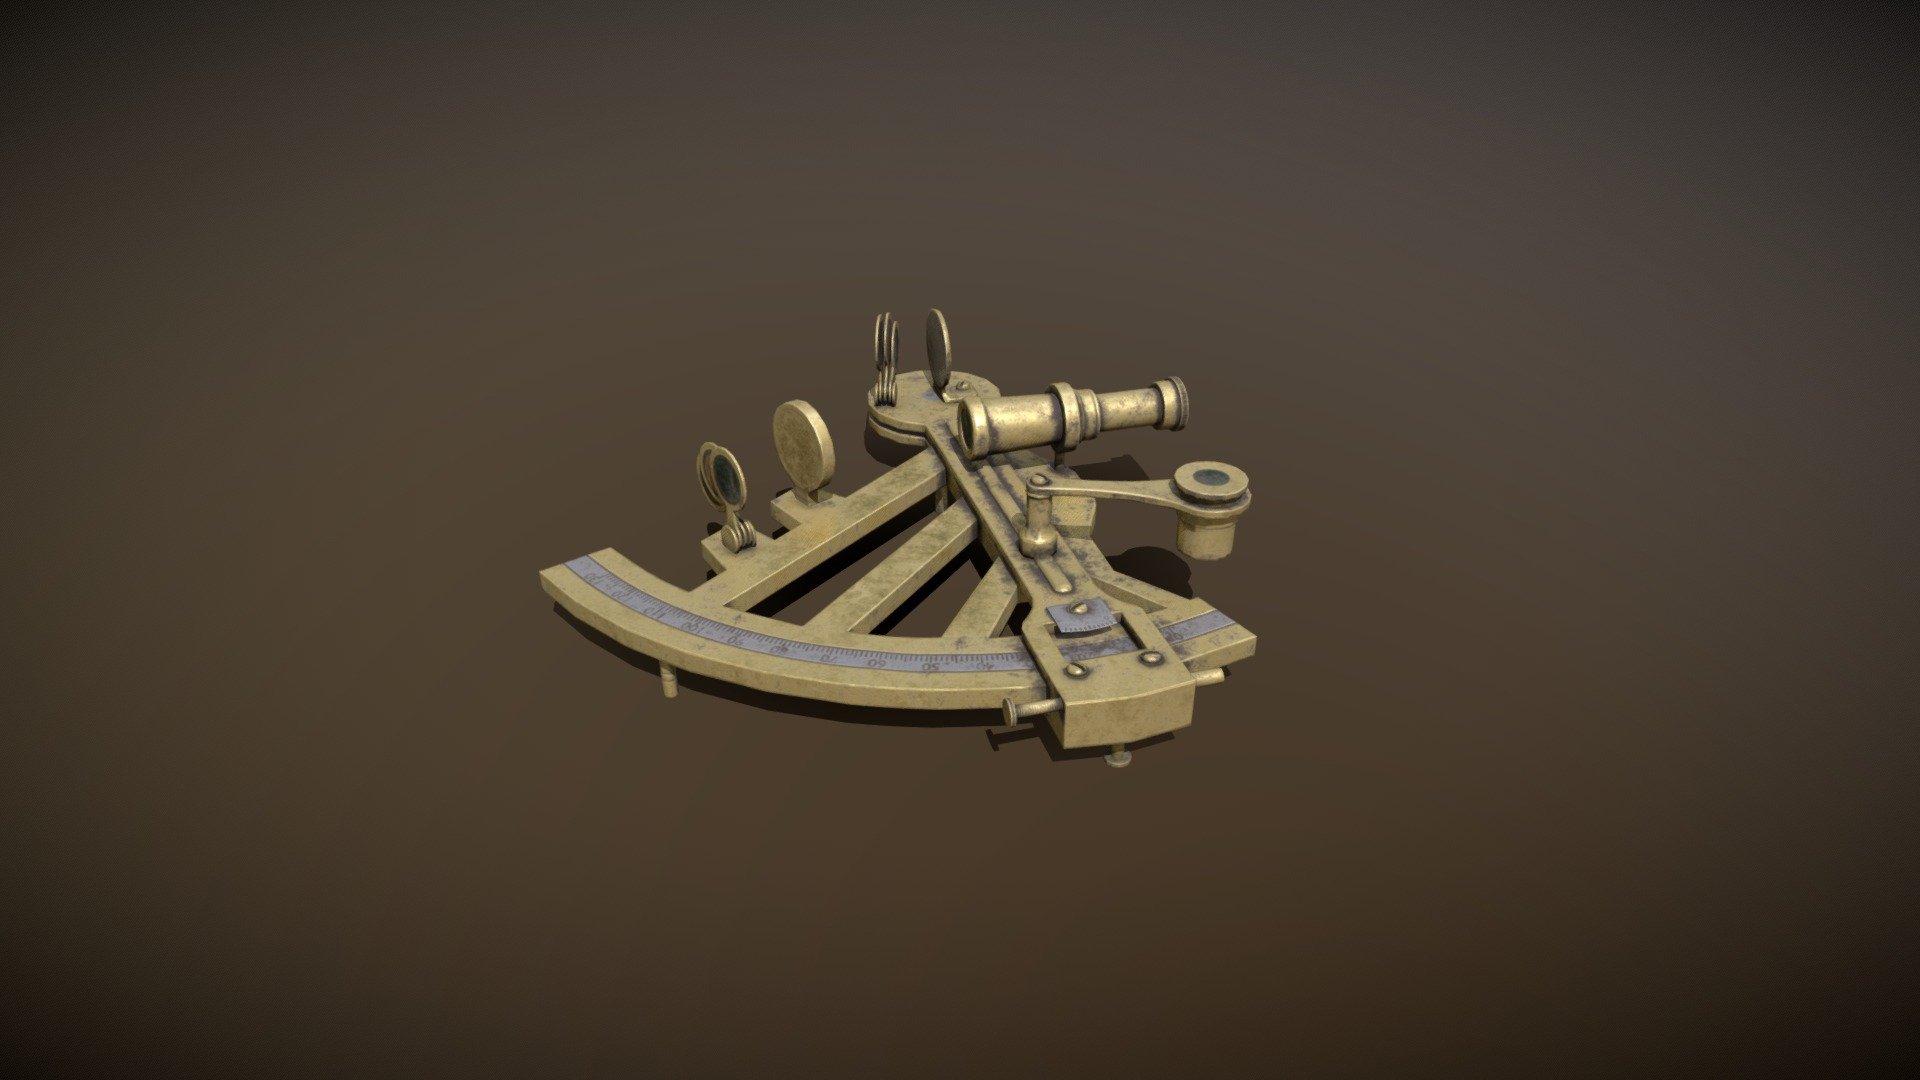 Small game asset I made. Software used: Blender (Low- &amp; Highpoly creation), Marmoset (Baking) &amp; Substance Painter (Texturing) - Sextant - 3D model by TheFalkonett 3d model